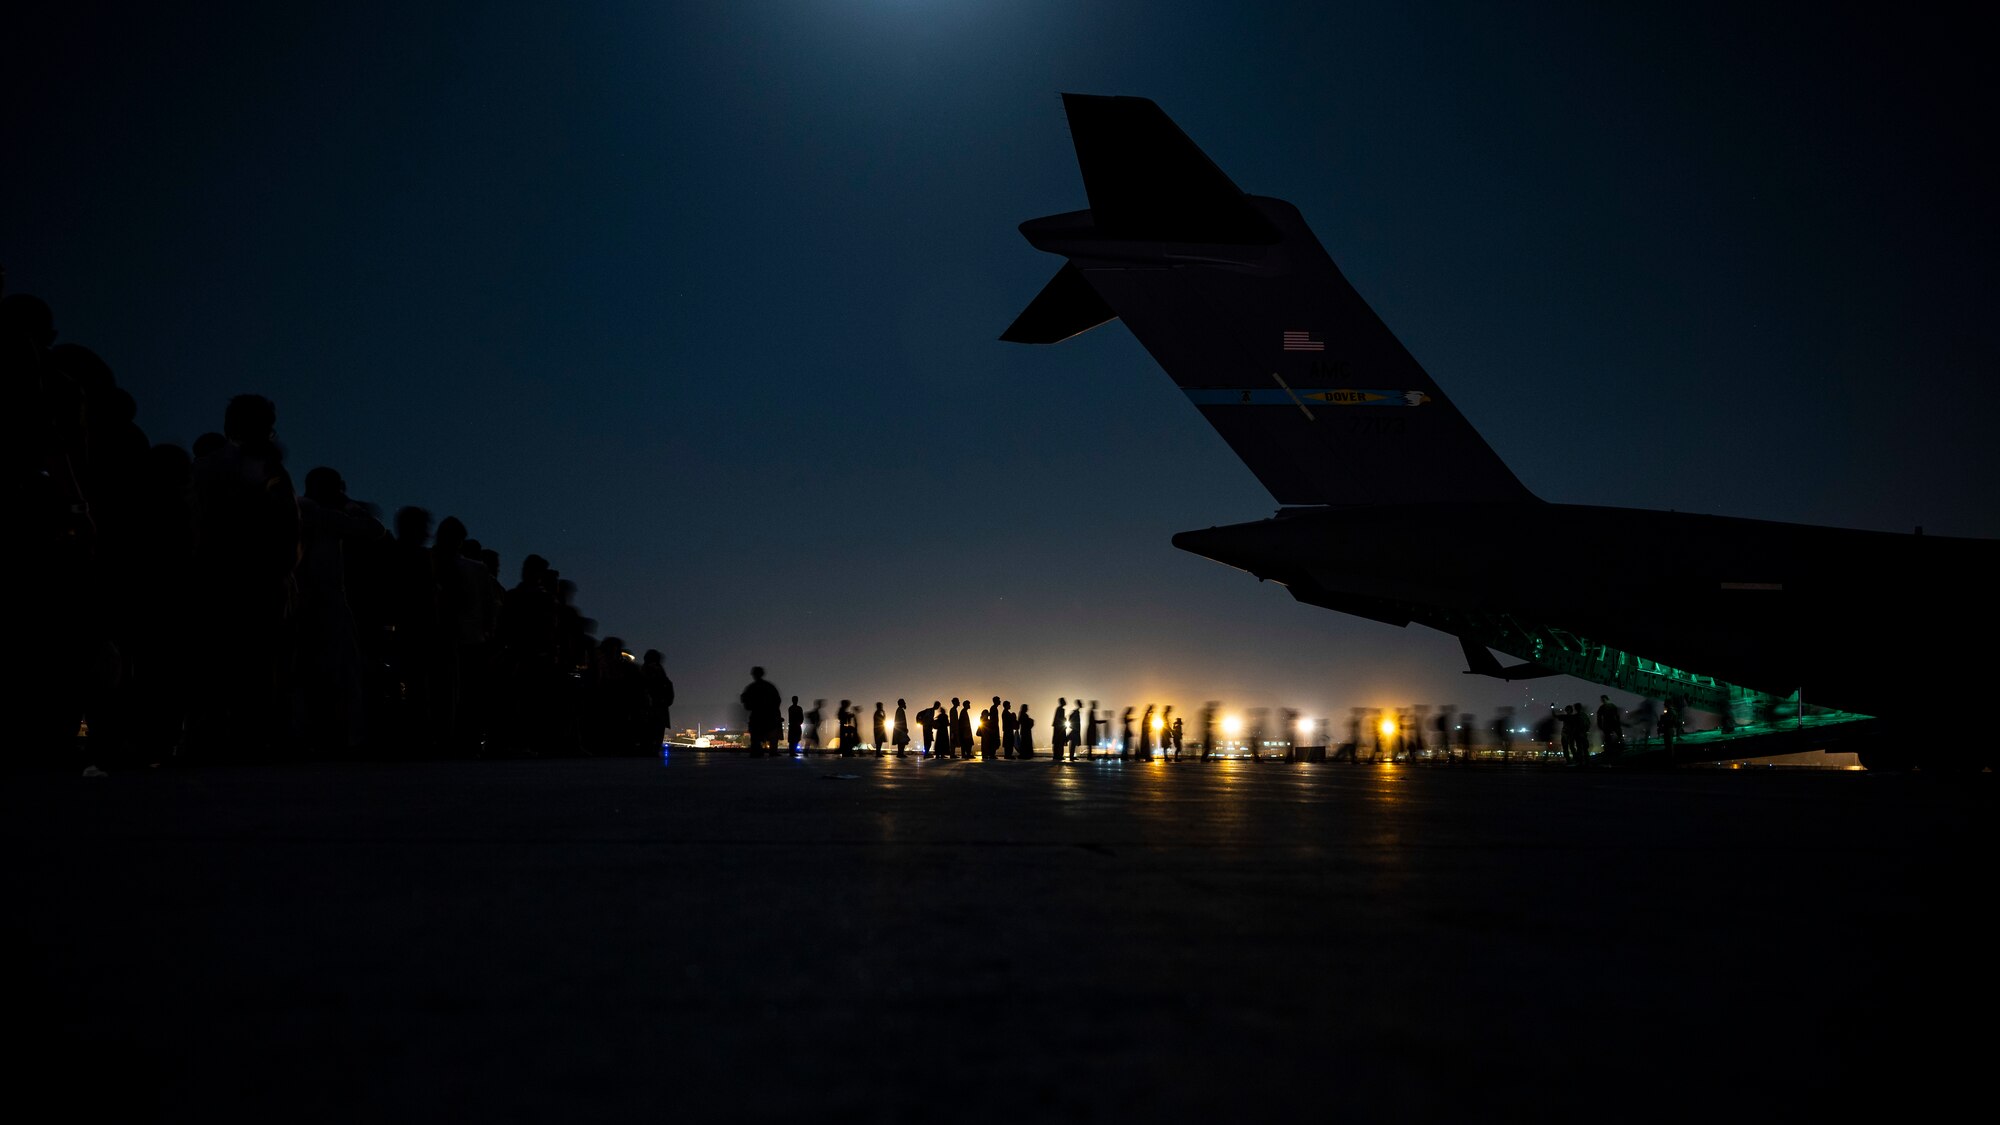 A U.S. Air Force aircrew, assigned to the 816th Expeditionary Airlift Squadron, assist qualified evacuees boarding a U.S. Air Force C-17 Globemaster III aircraft in support of the Afghanistan evacuation at Hamid Karzai International Airport, Afghanistan, Aug. 21, 2021. The Department of Defense is committed to supporting the U.S. State Department in the departure of U.S. and allied civilian personnel from Afghanistan, and to evacuate Afghan allies safely. (U.S. Air Force photo by Senior Airman Taylor Crul)